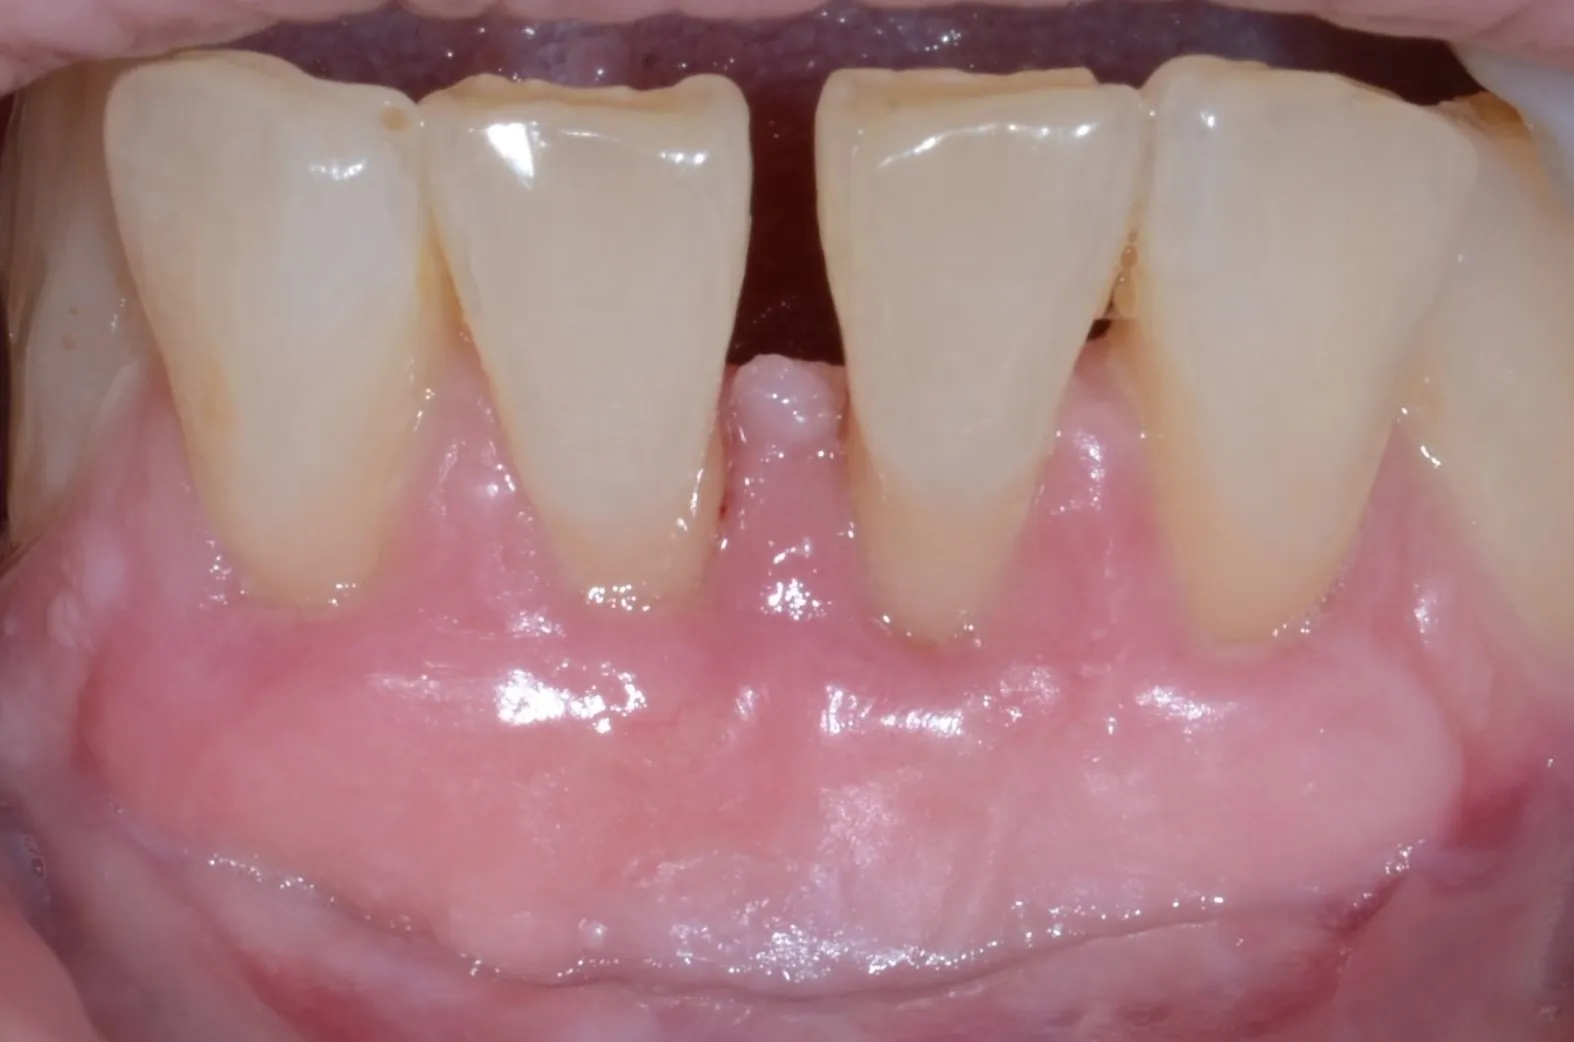 Post-procedure image showing improved gum health after grafting at Westport Periodontics.